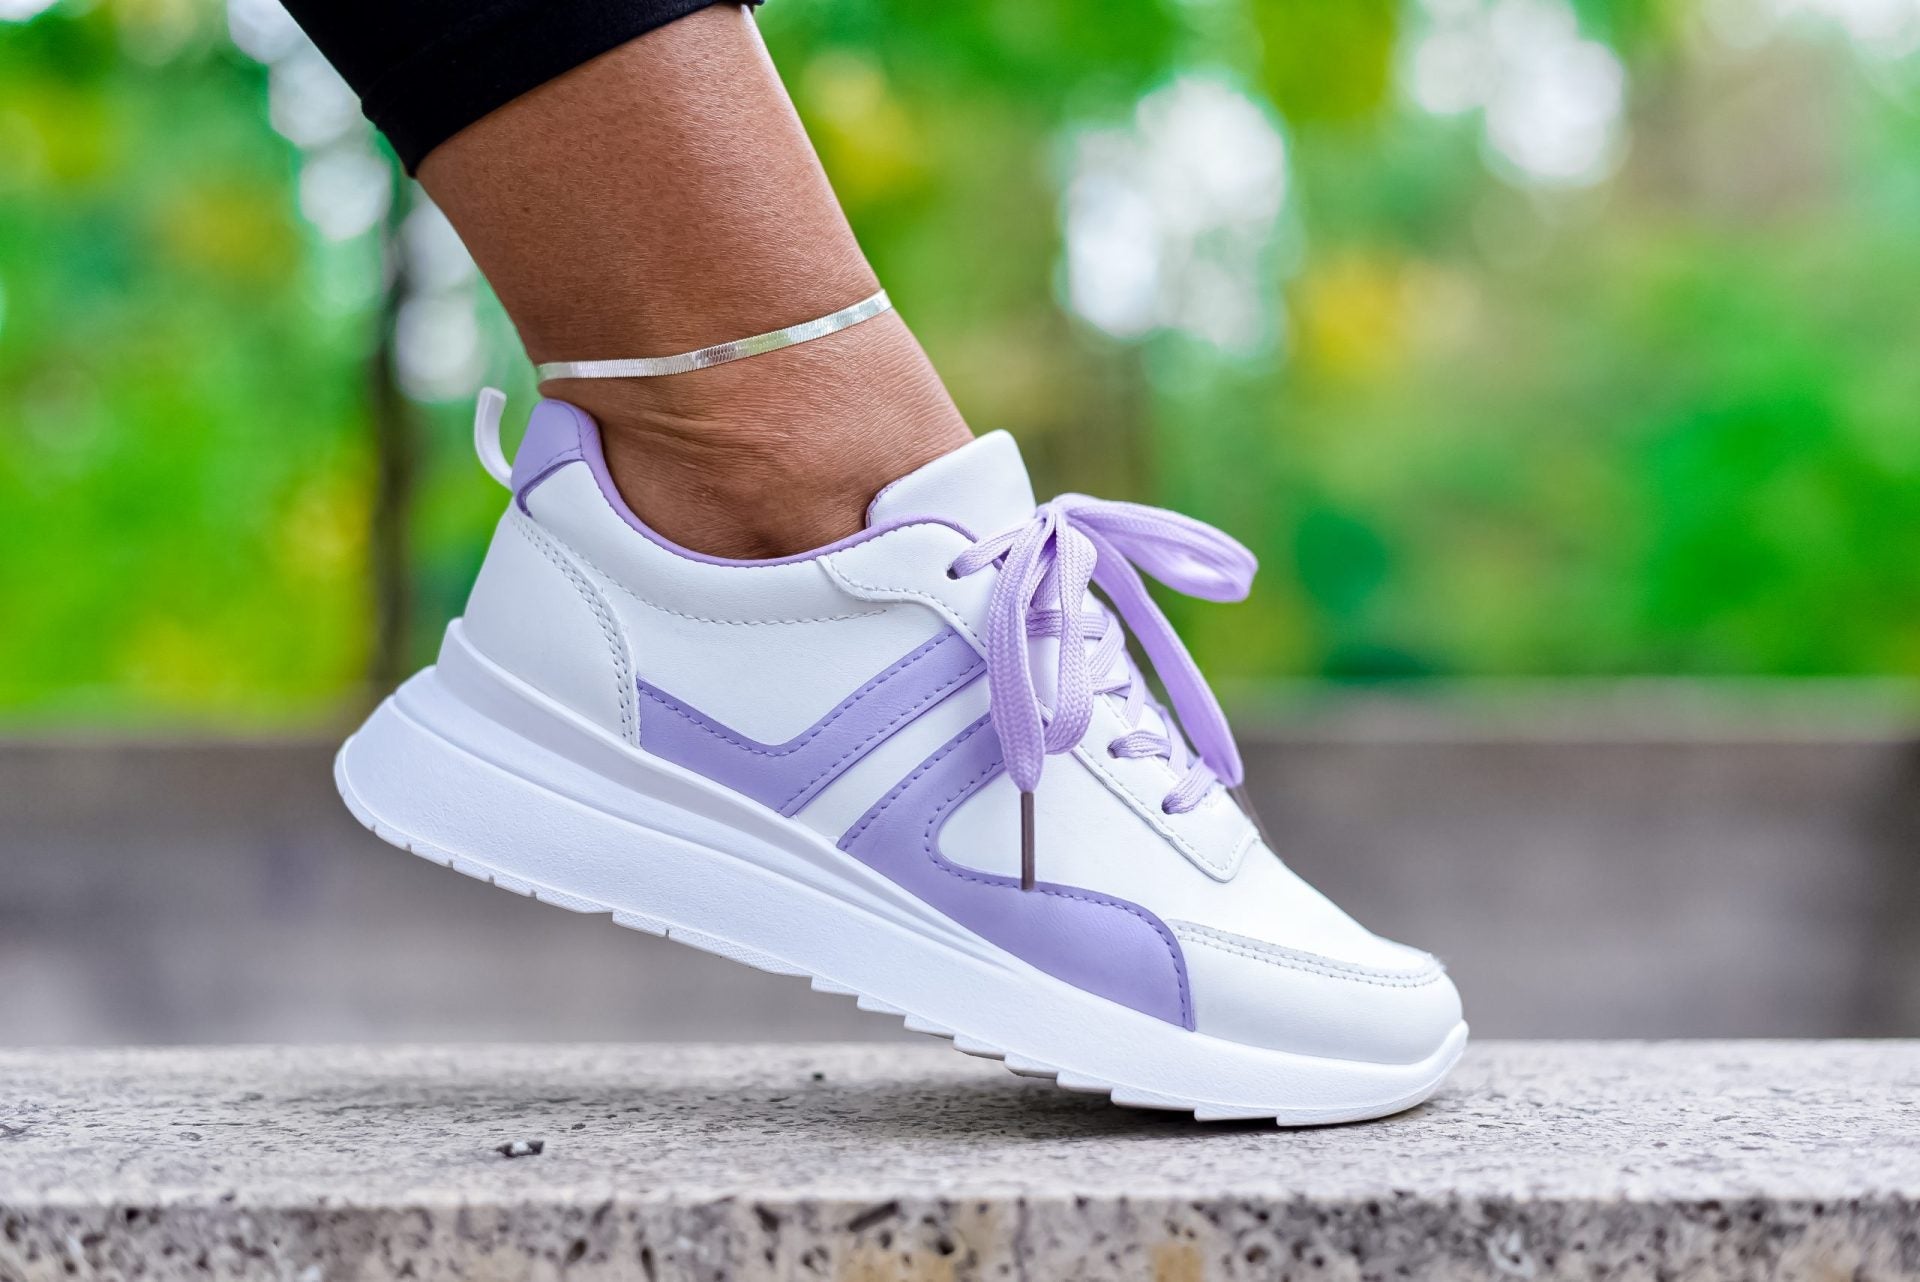 Women's White Purple Sneakers Made Of Ecological Leather